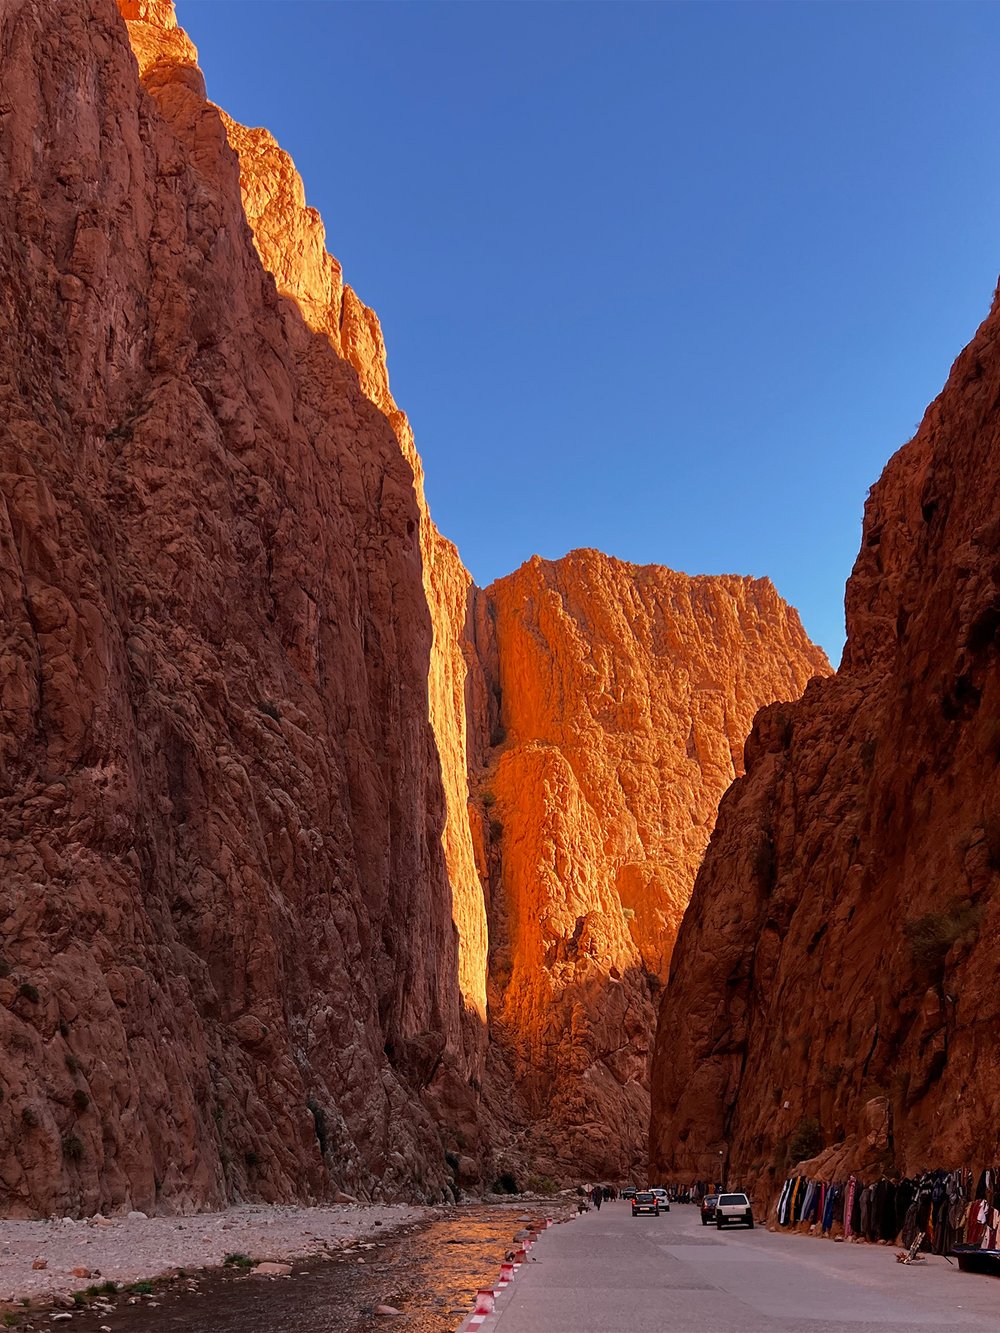 The Todra Gorge, Morocco